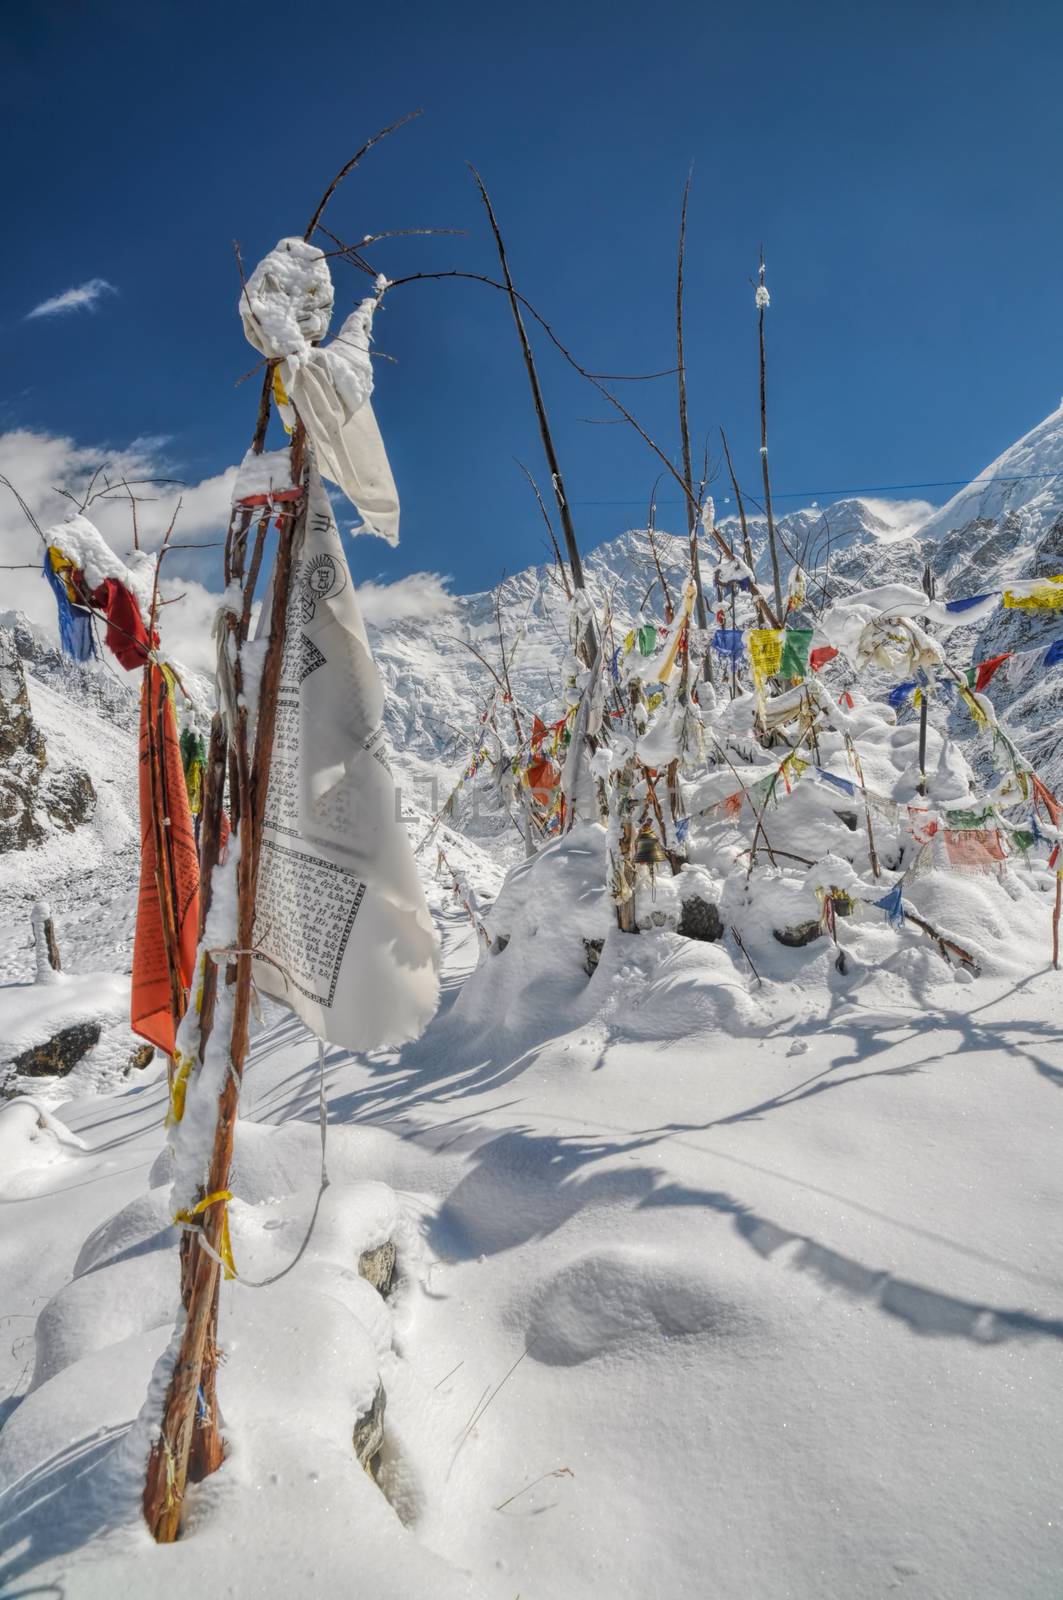 Buddhist prayer flags in Himalayas near Kanchenjunga, the third tallest mountain in the world